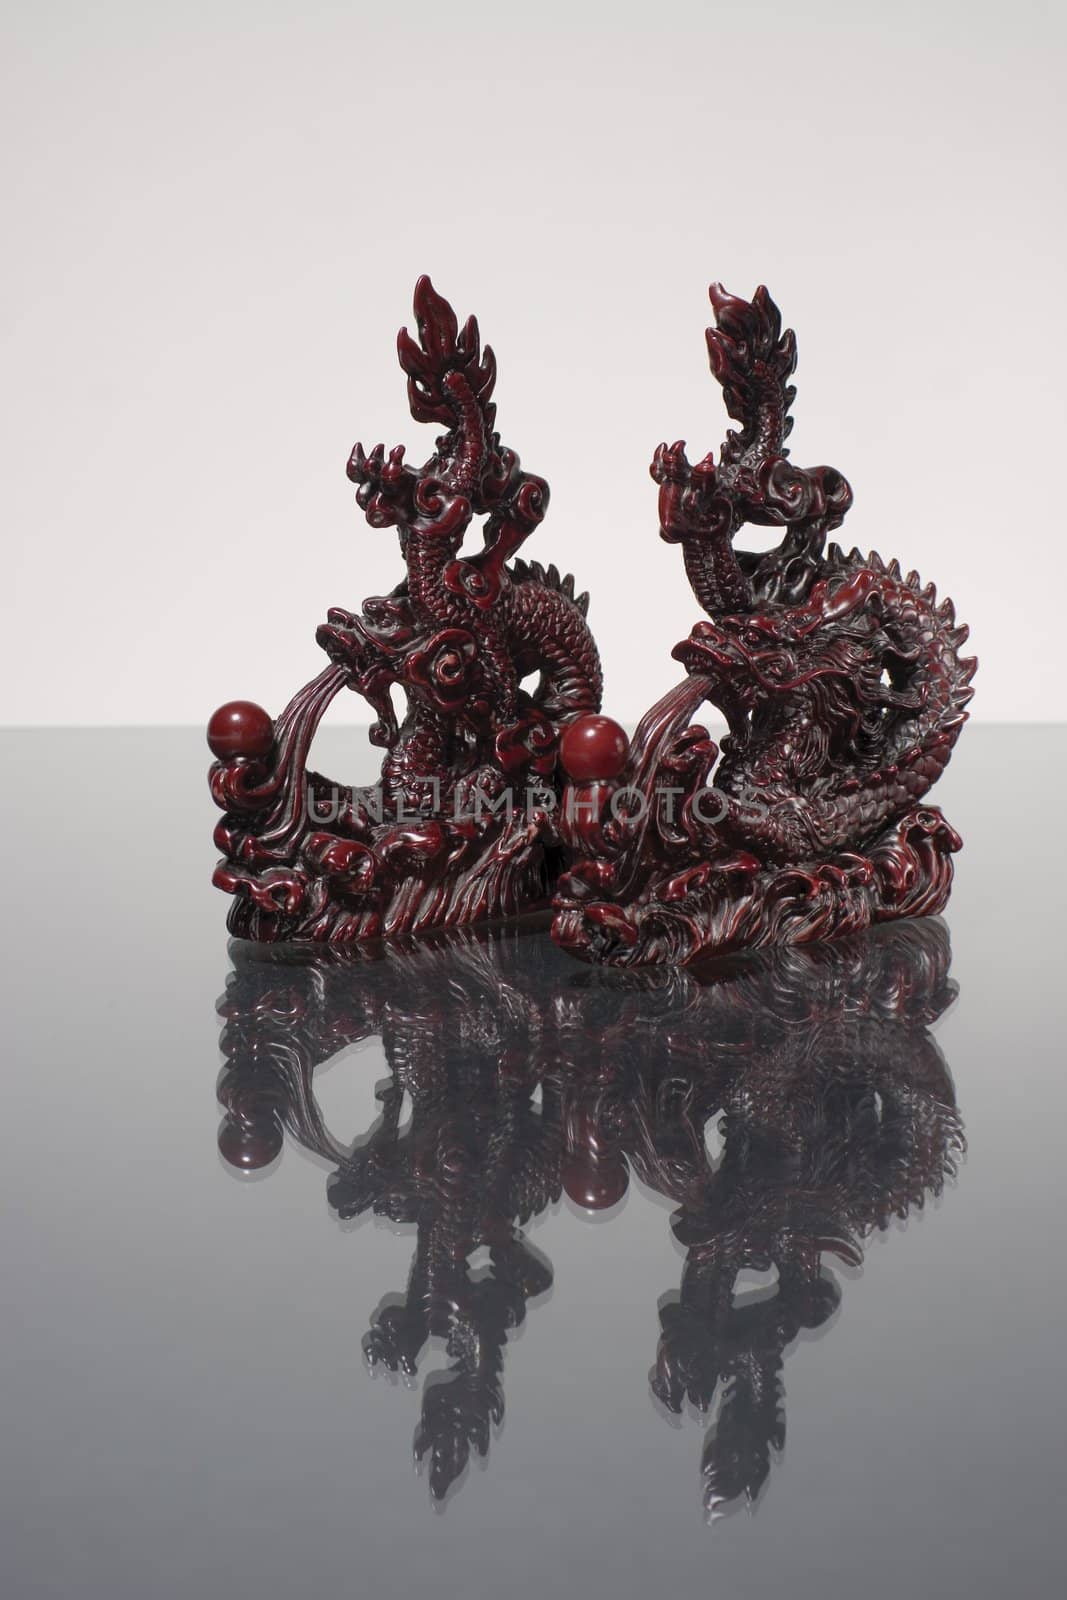 Twow dragon statue racing over reflecting surface